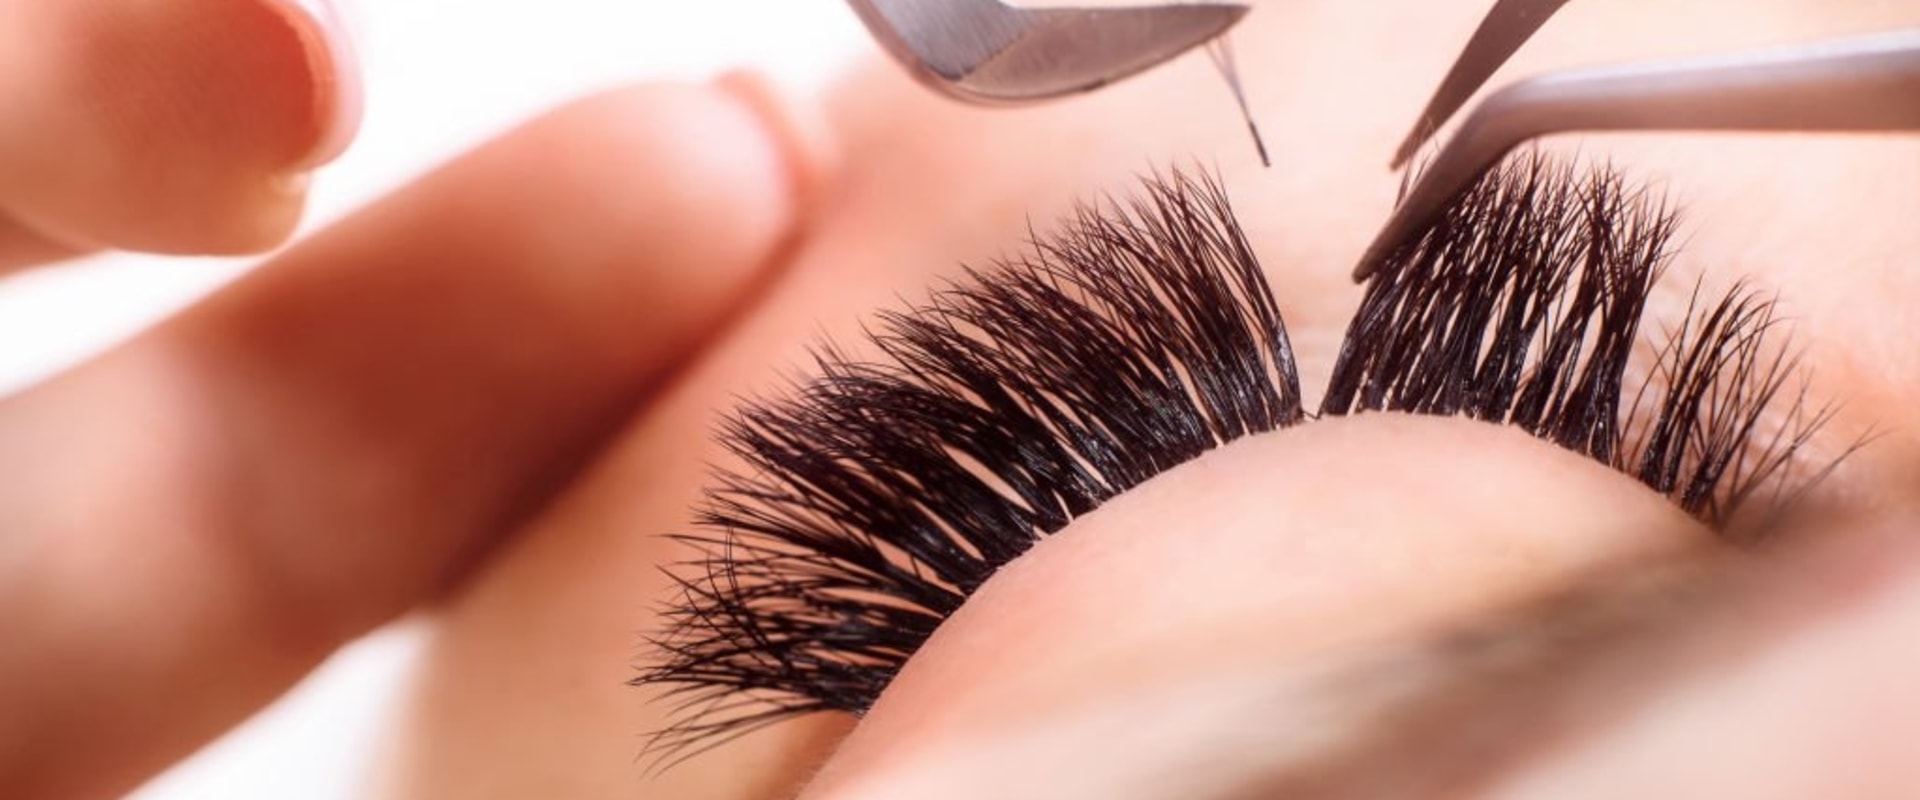 Latisse vs Eyelash Extensions: Which is Better?